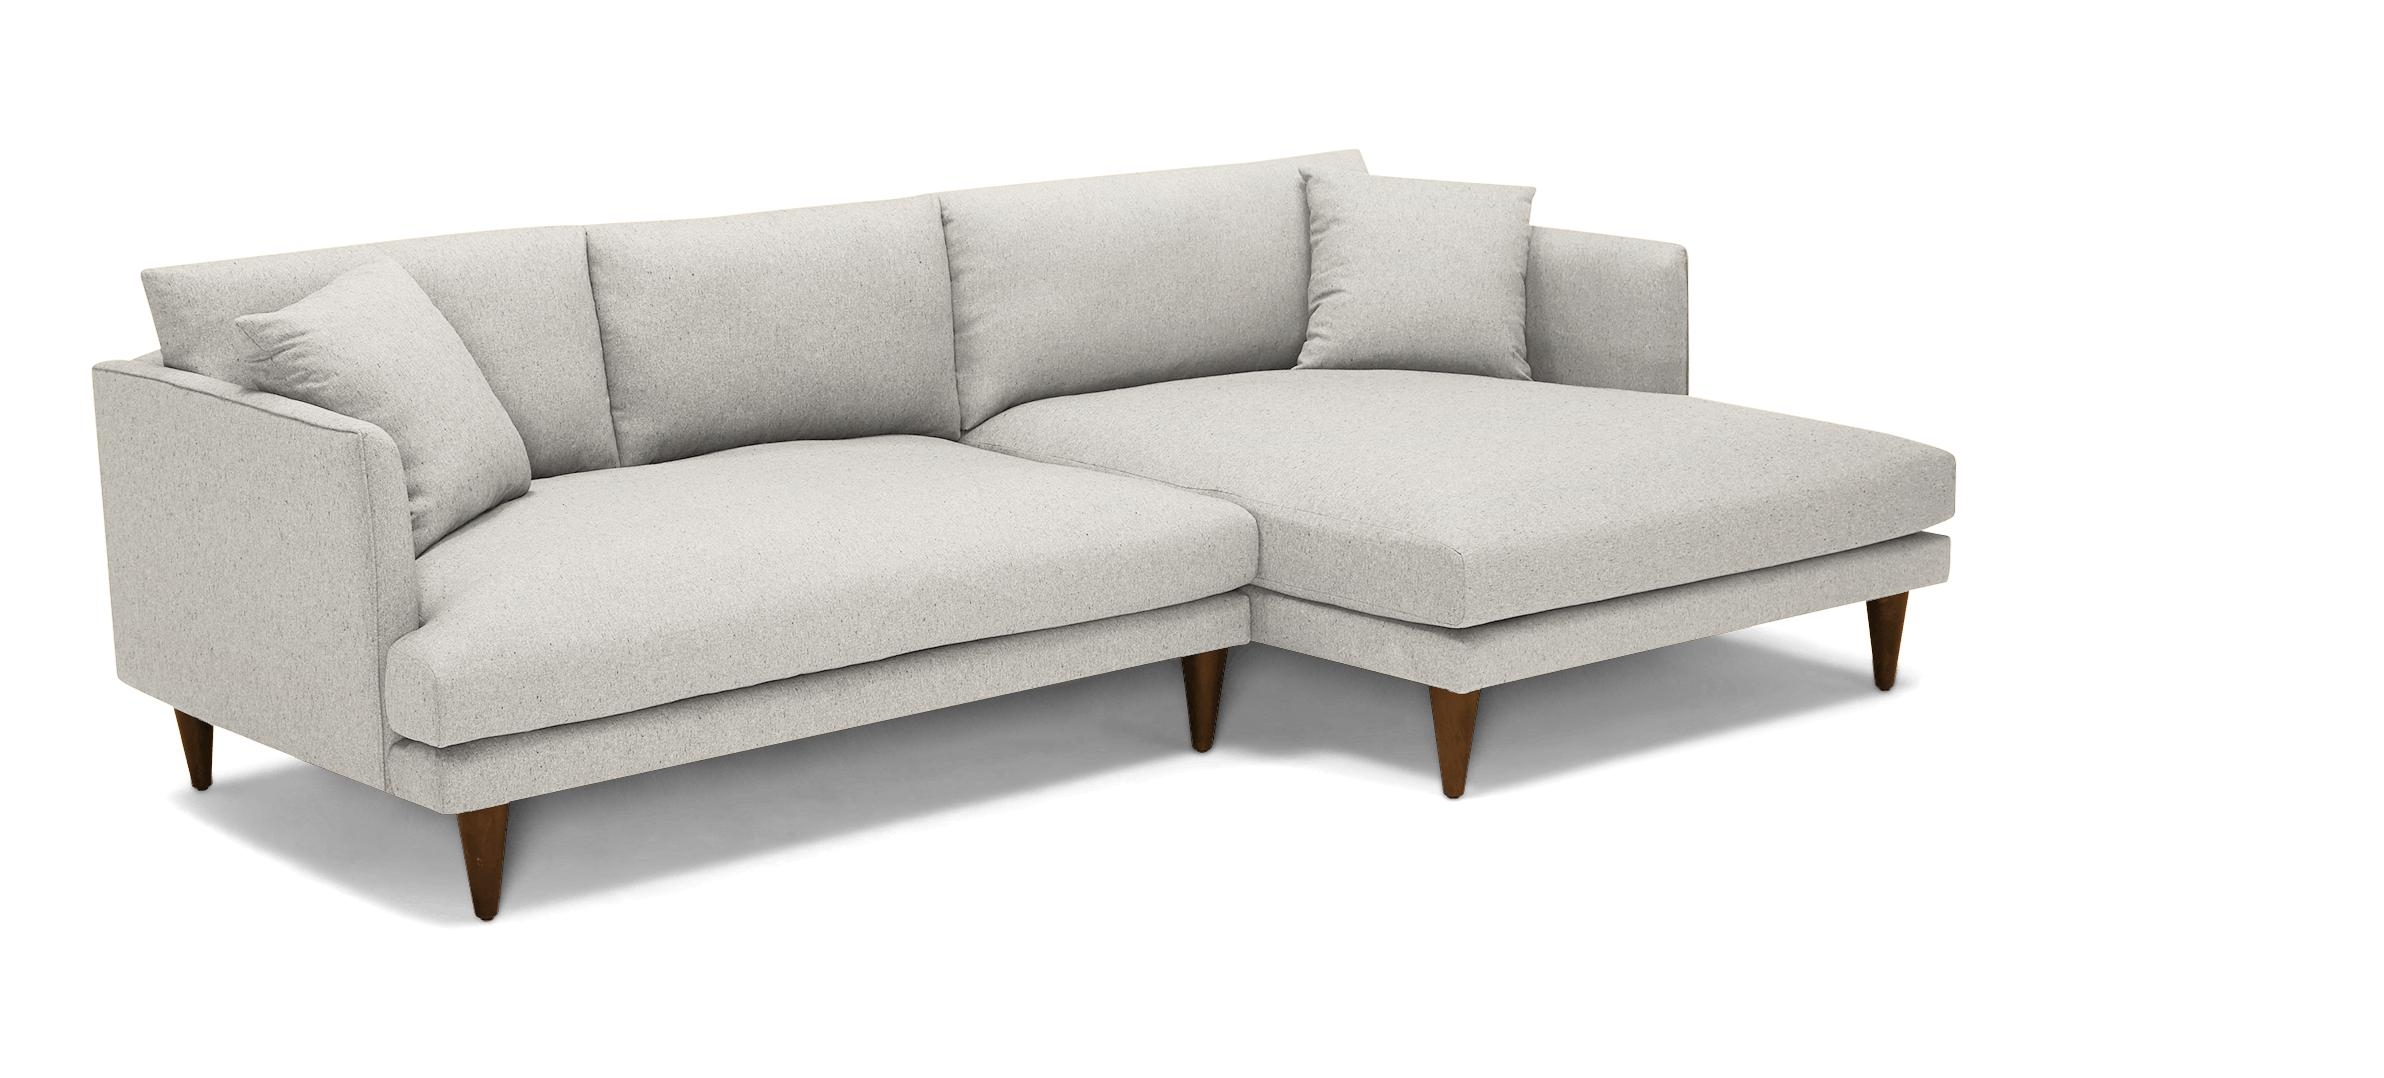 Gray Lewis Mid Century Modern Sectional - Bloke Cotton - Mocha - Right - Cone - Image 1